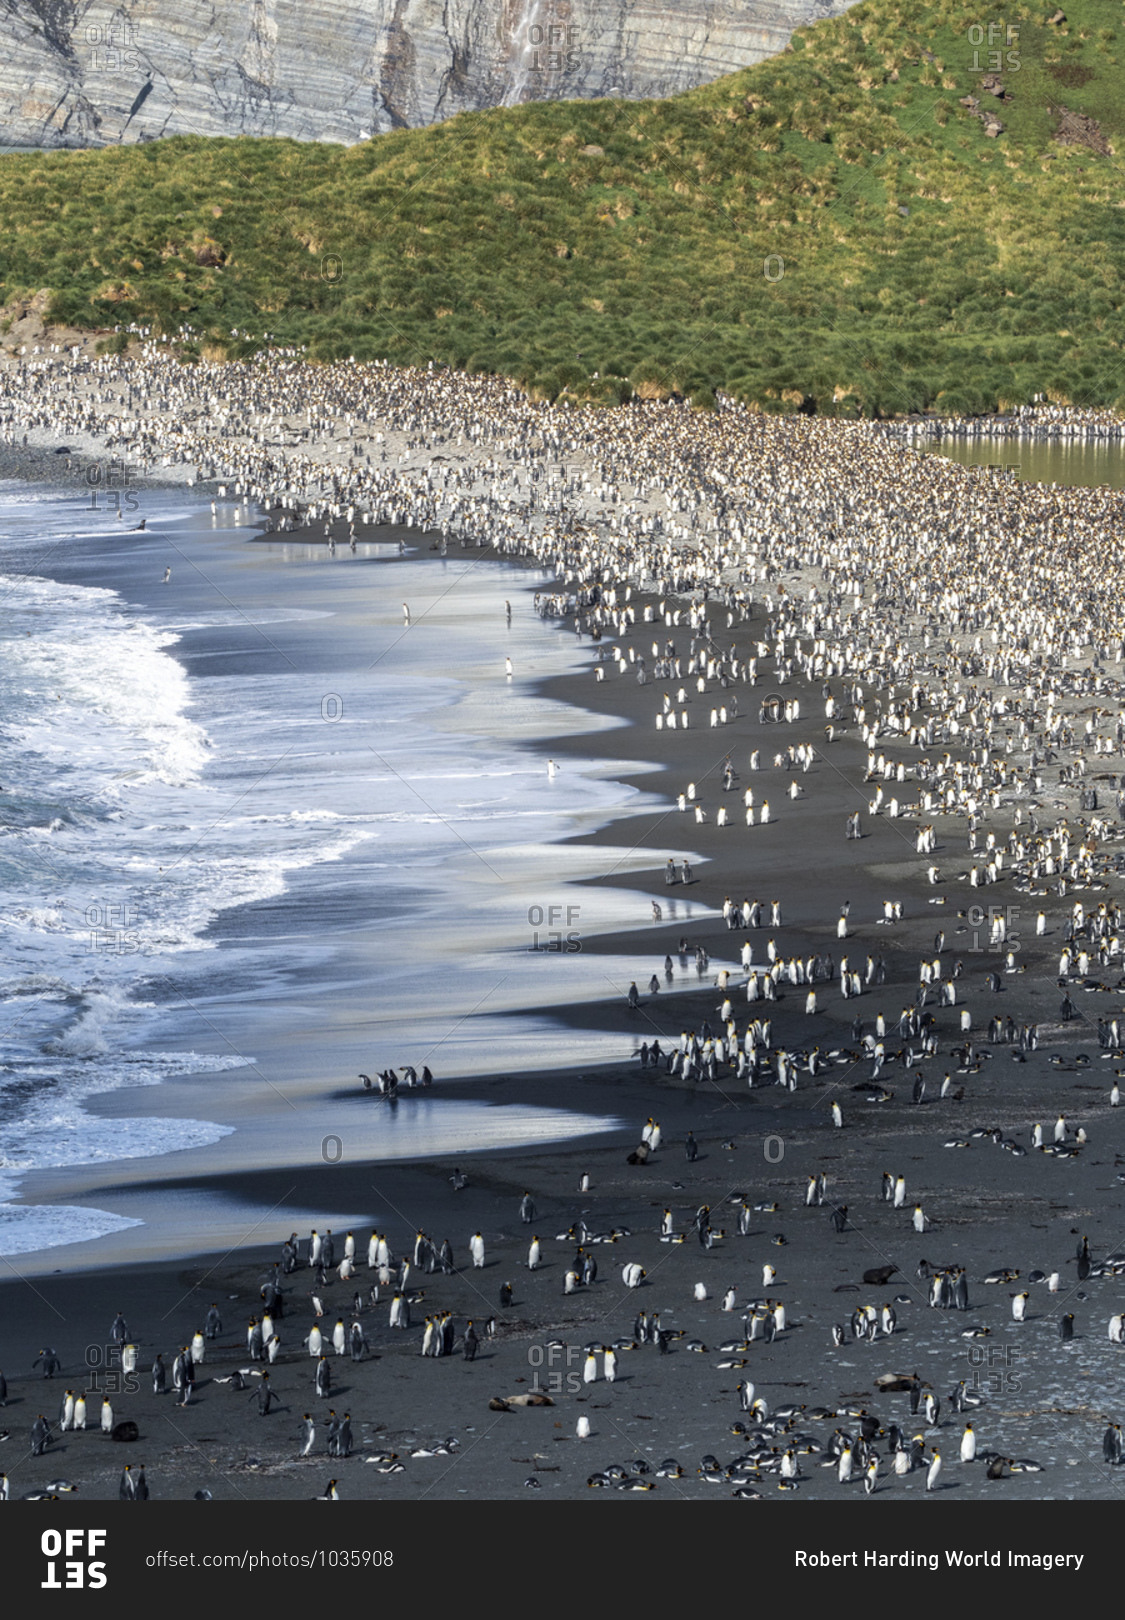 A huge King Penguin (Aptenodytes patagonicus) breeding colony on the beaches of Gold Harbor, South Georgia, Polar Regions